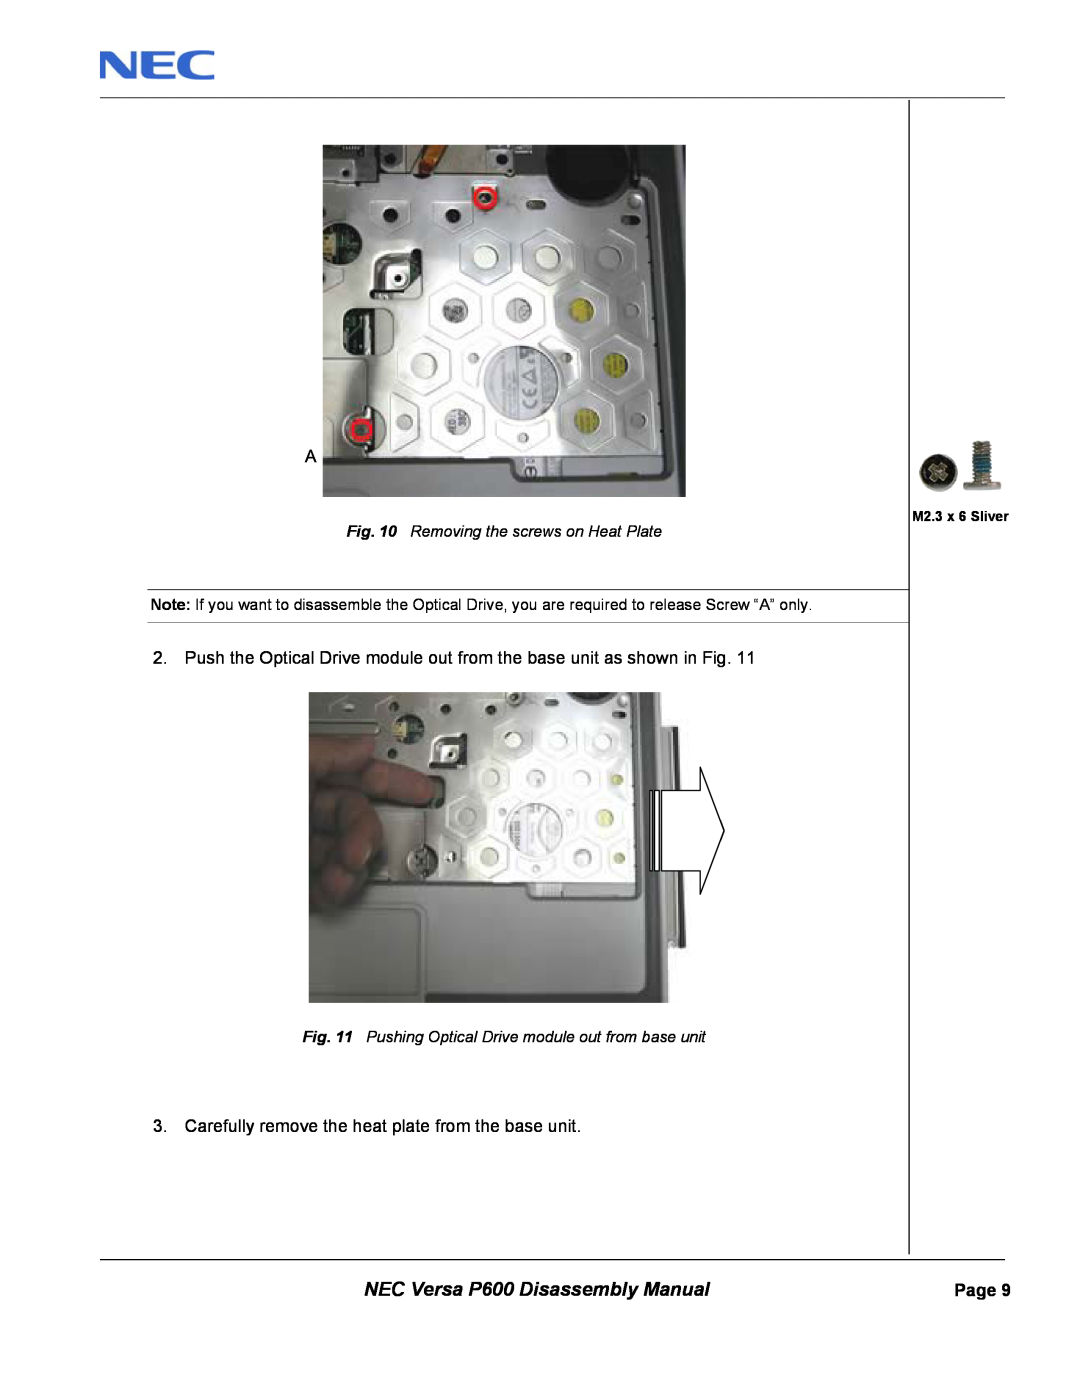 NEC manual NEC Versa P600 Disassembly Manual, Push the Optical Drive module out from the base unit as shown in Fig 